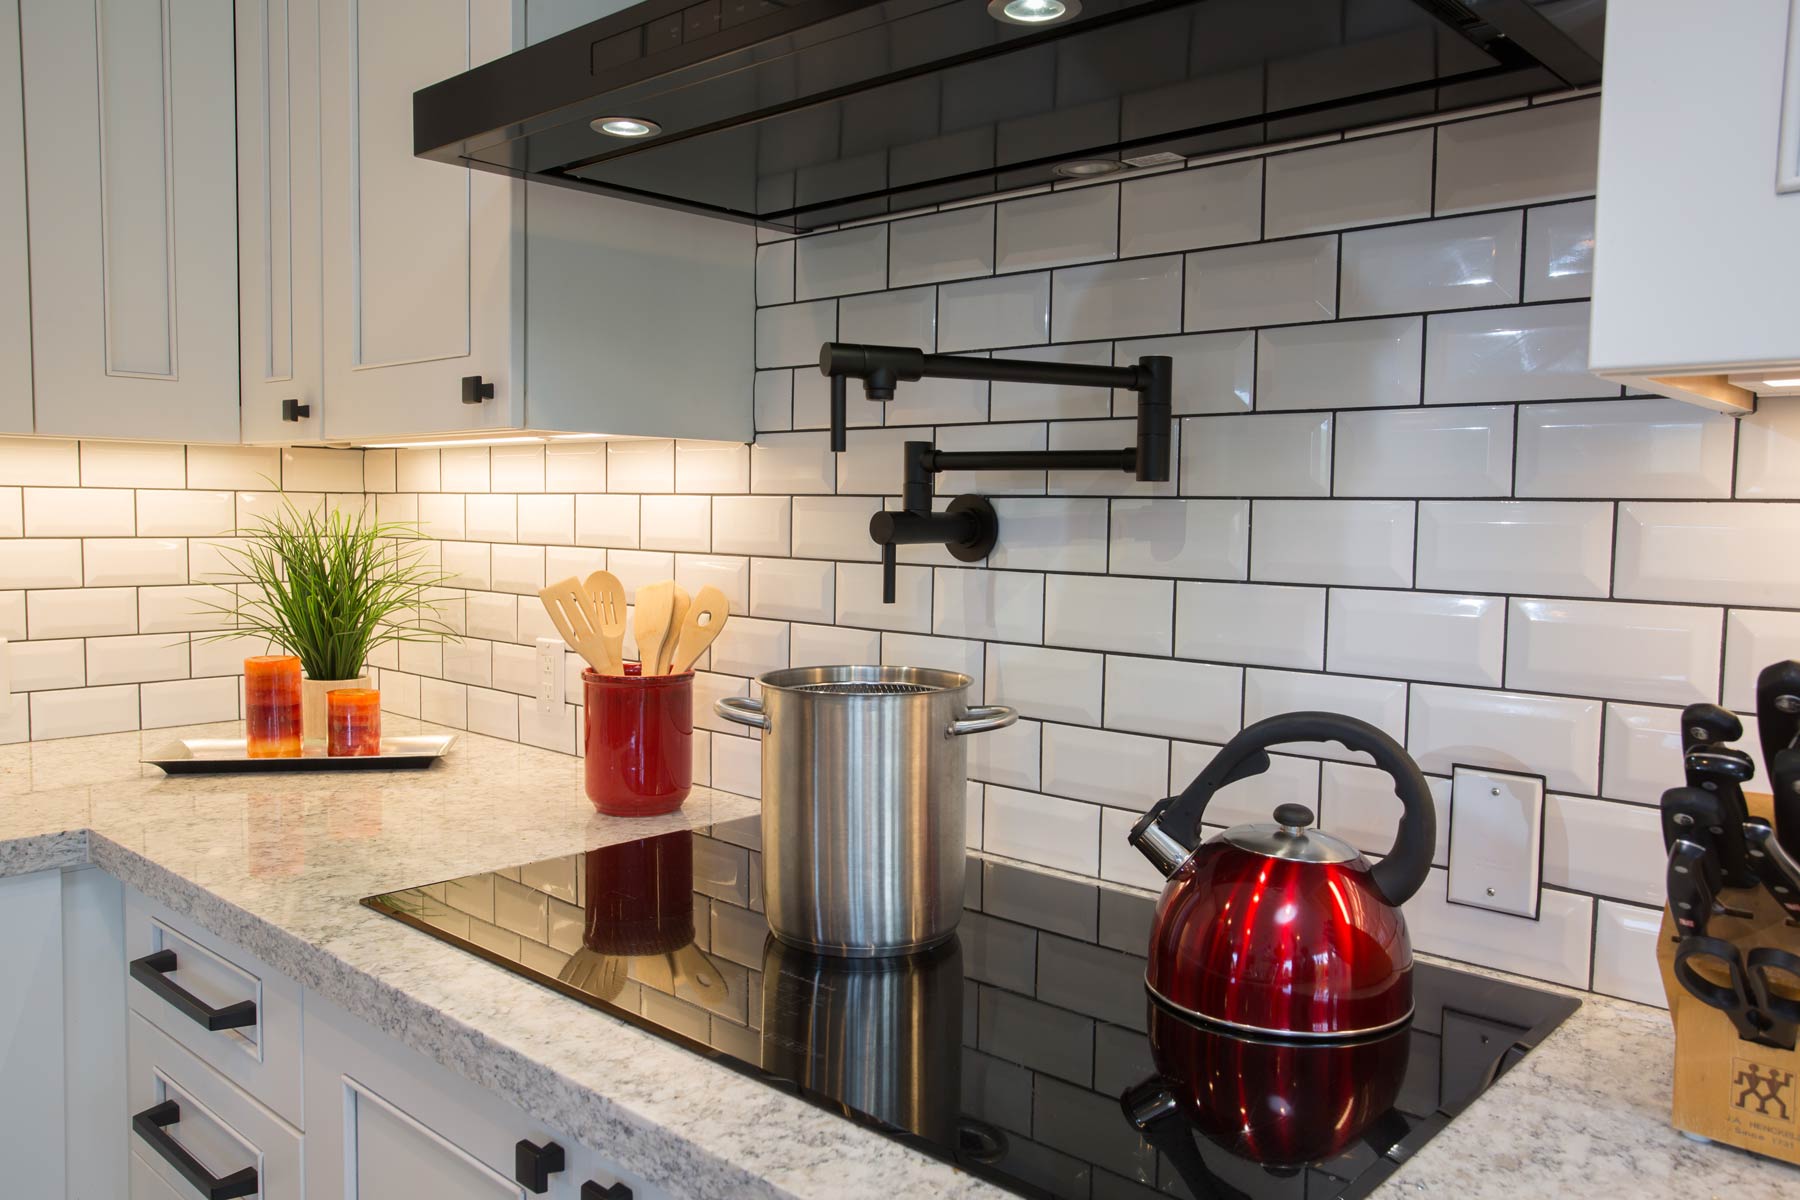 Stovetop from Accent Design kitchen remodel